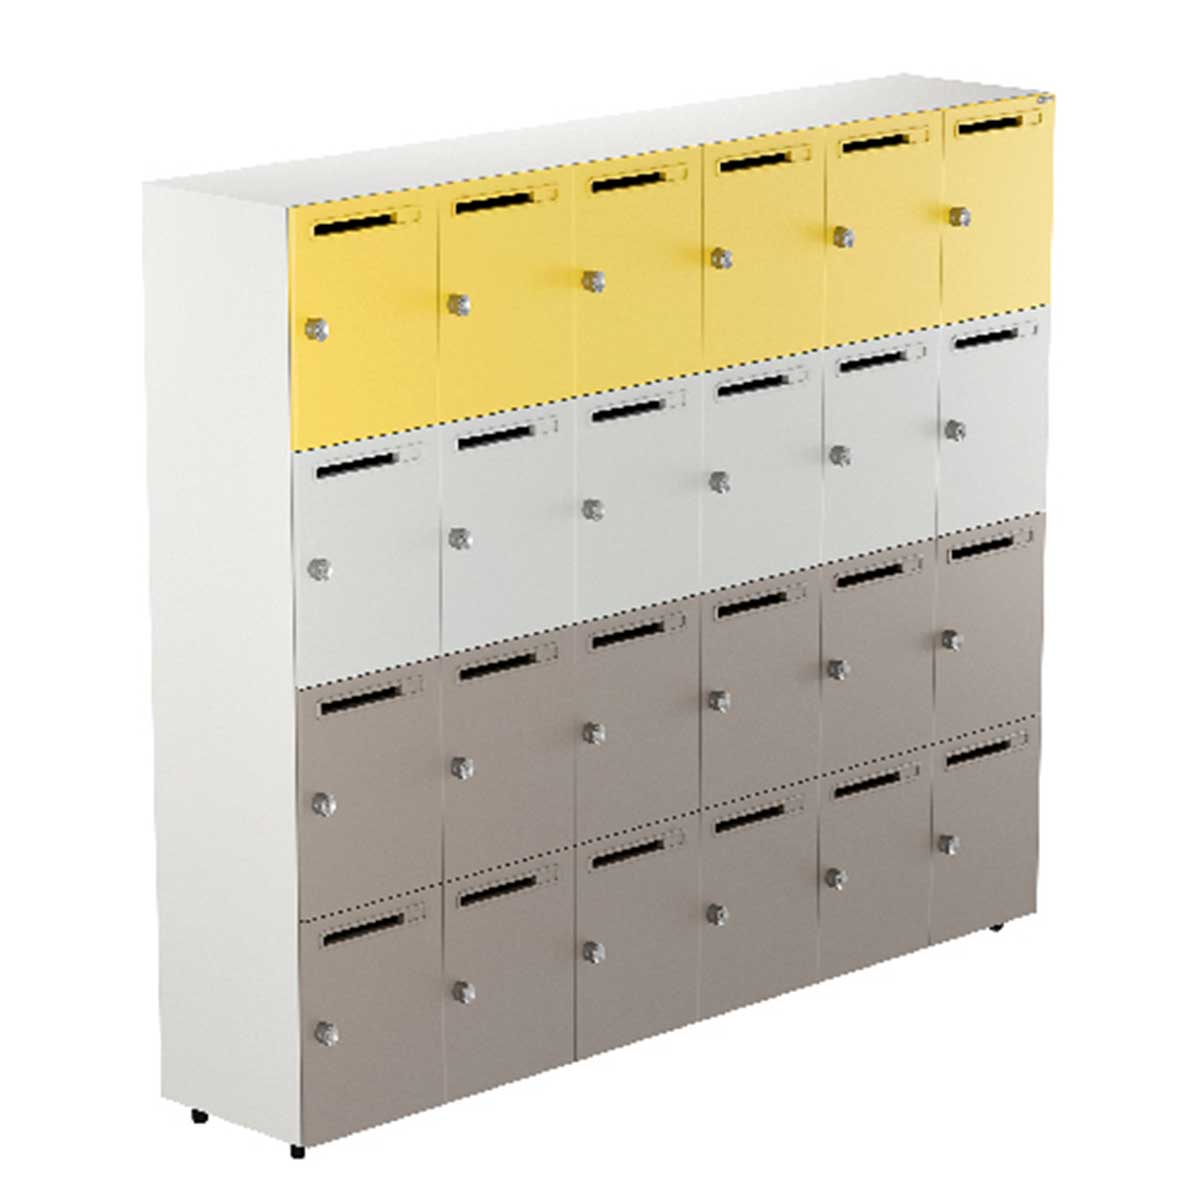 Storage Lockers Manufacturers, Suppliers in Greater Kailash